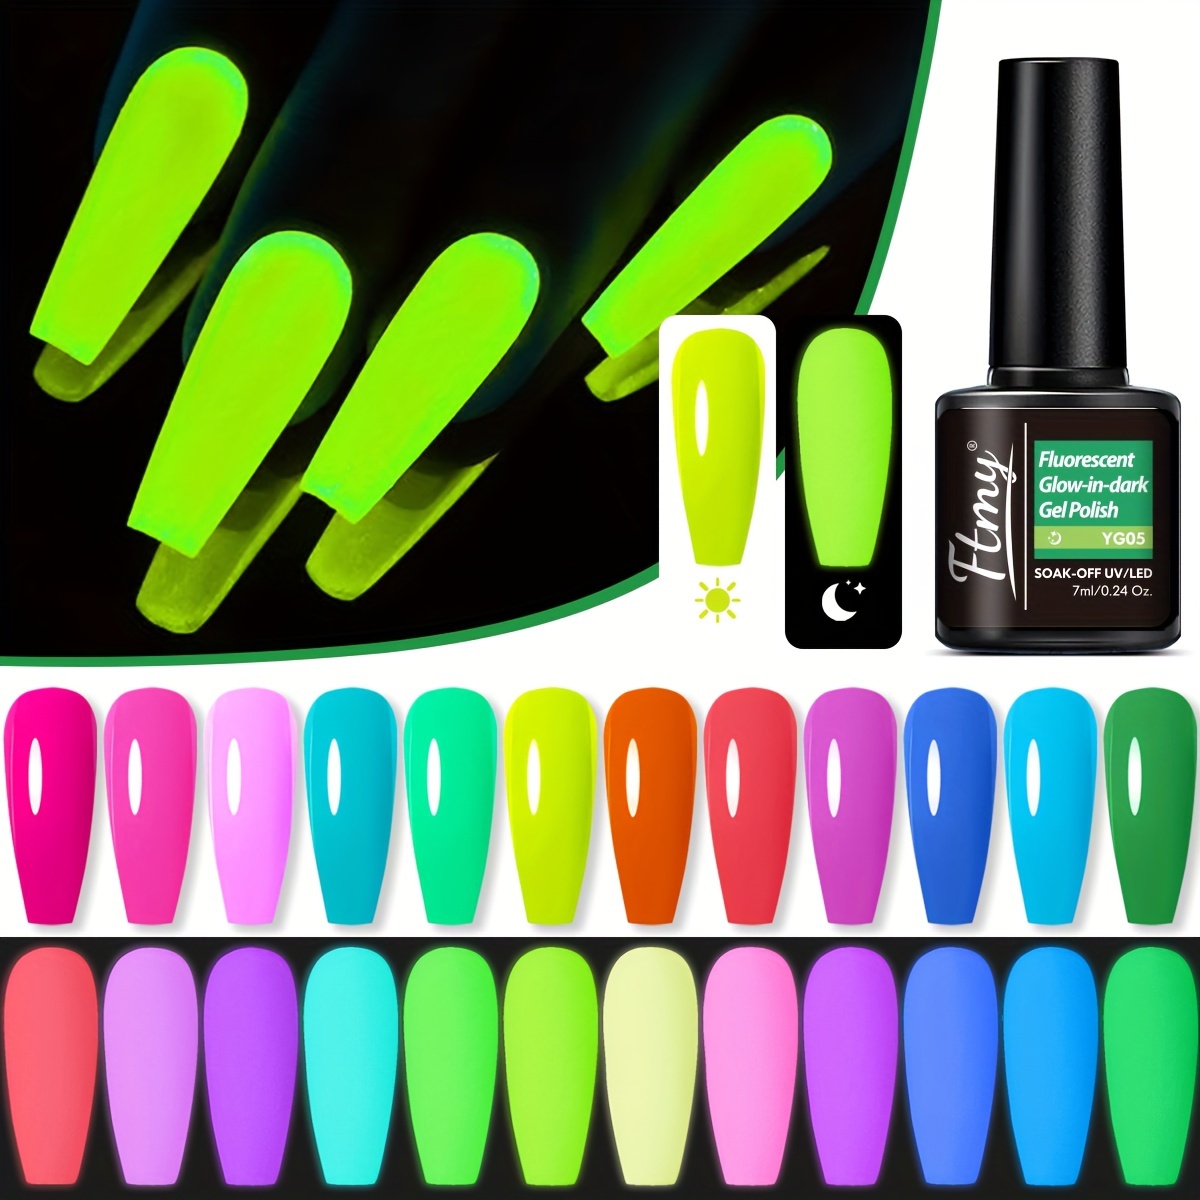 

glamour Glow" Ftmy Glow-in-the-dark Gel Nail Polish, 7ml - Candy Colors, Semi-transparent Shine, Uv/led Ready For Dazzling Nighttime Manicures